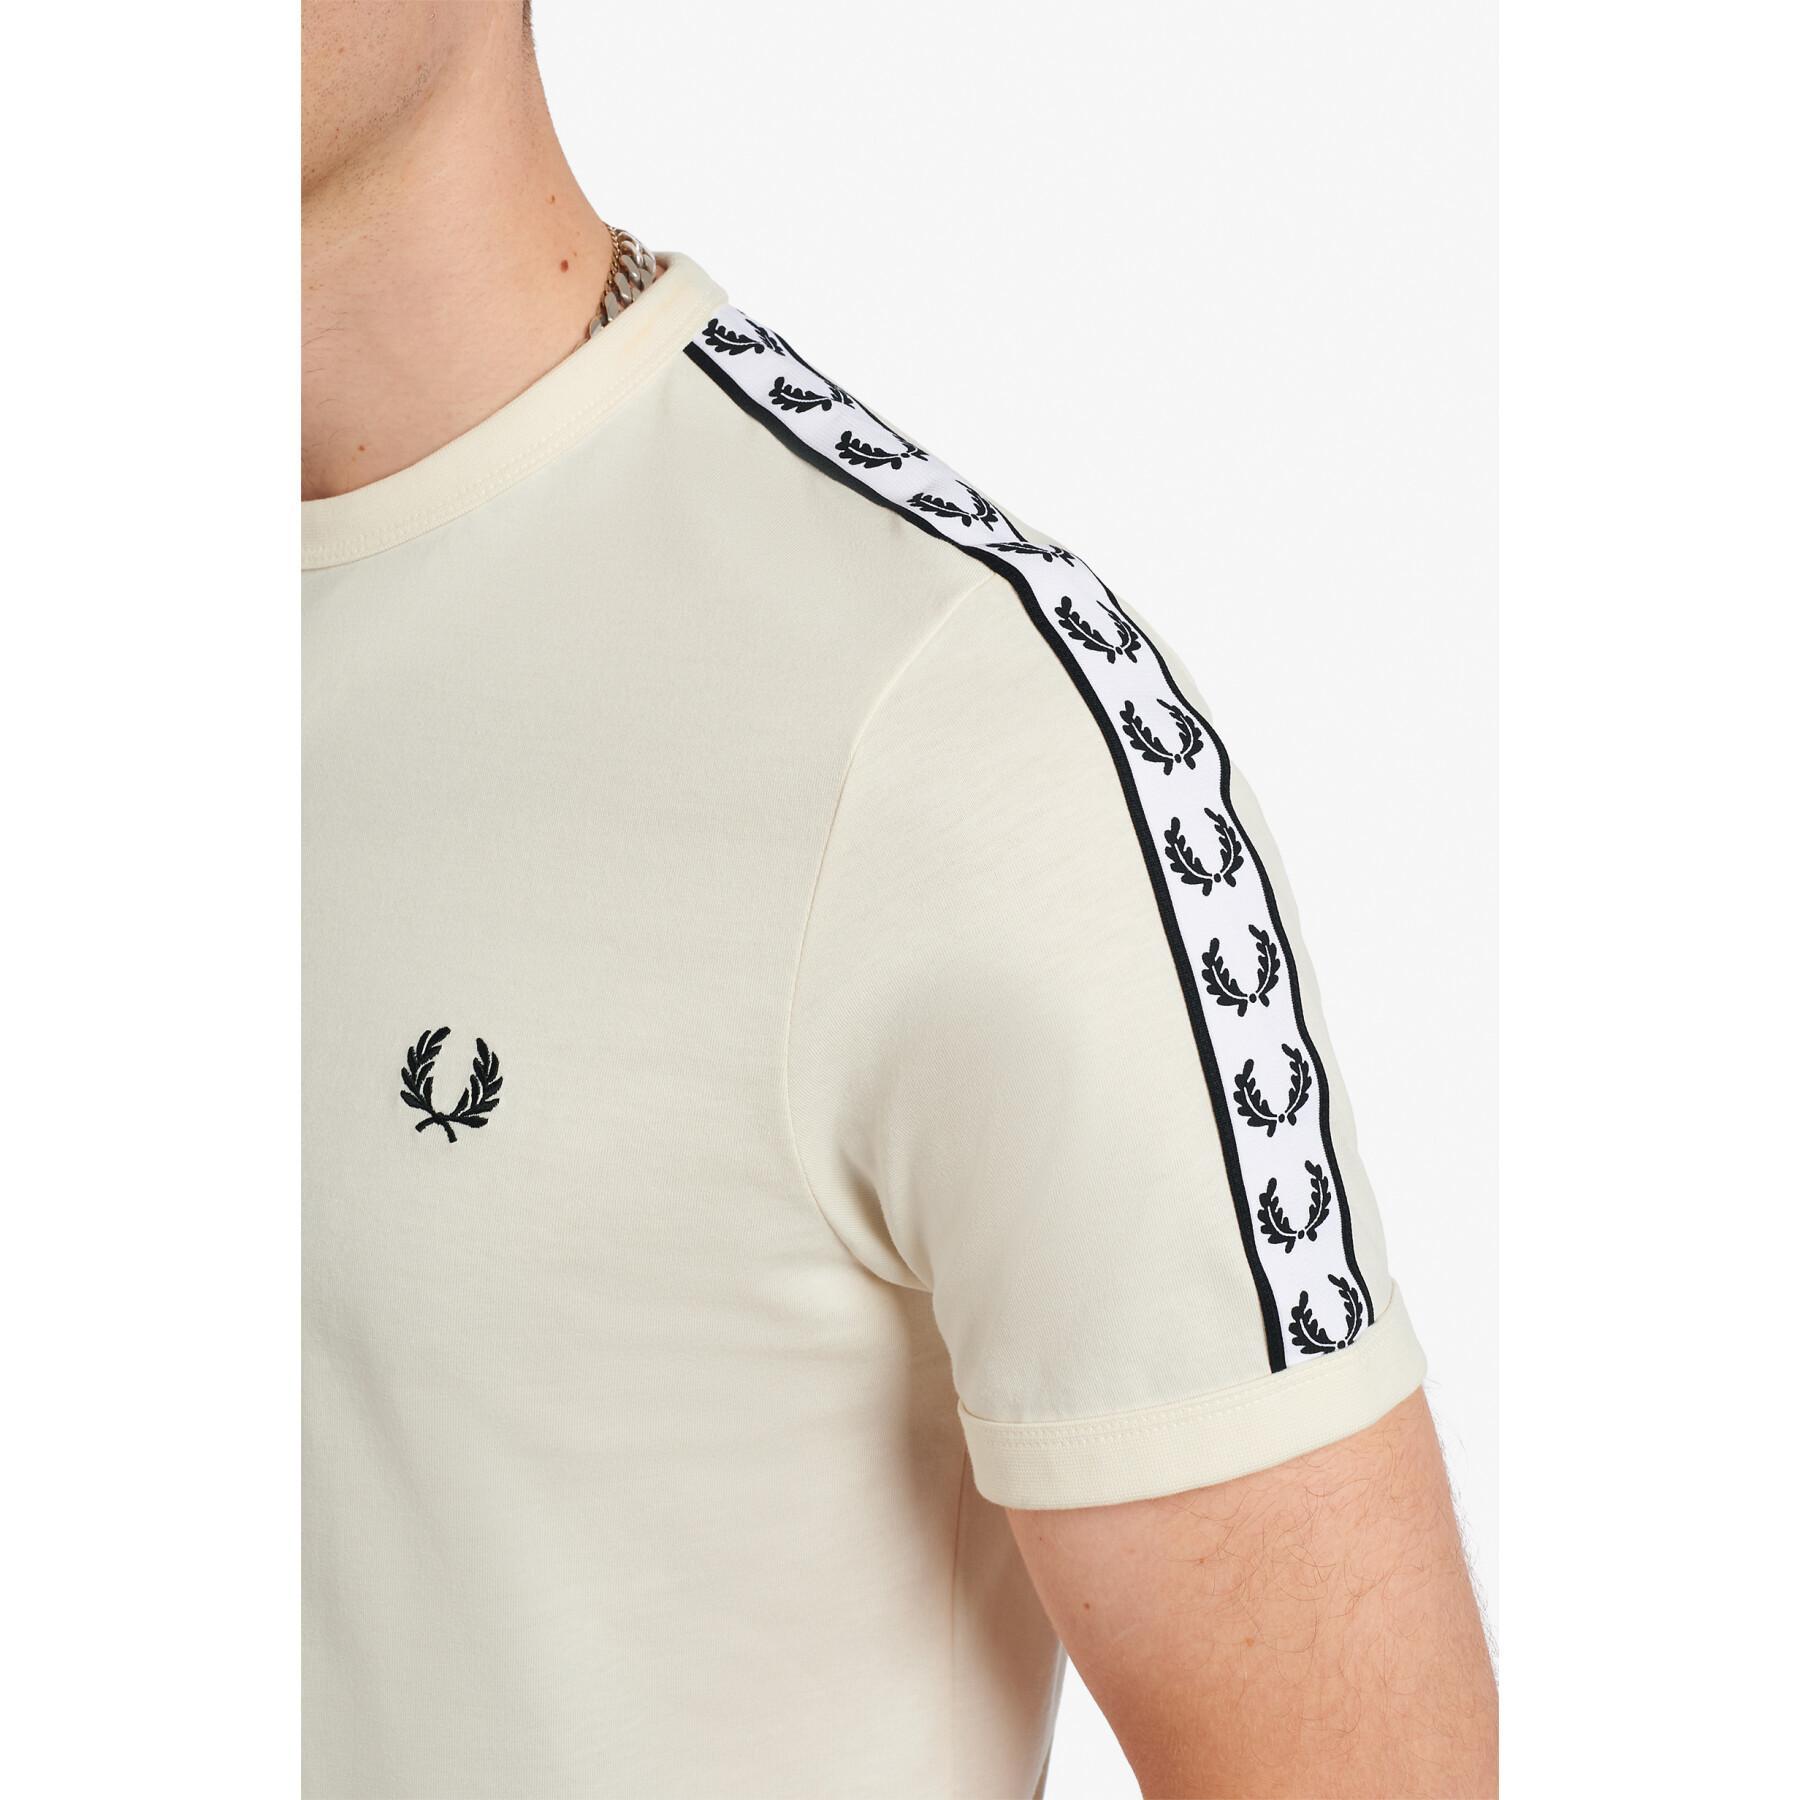 Maglietta Fred Perry Taped Ringer